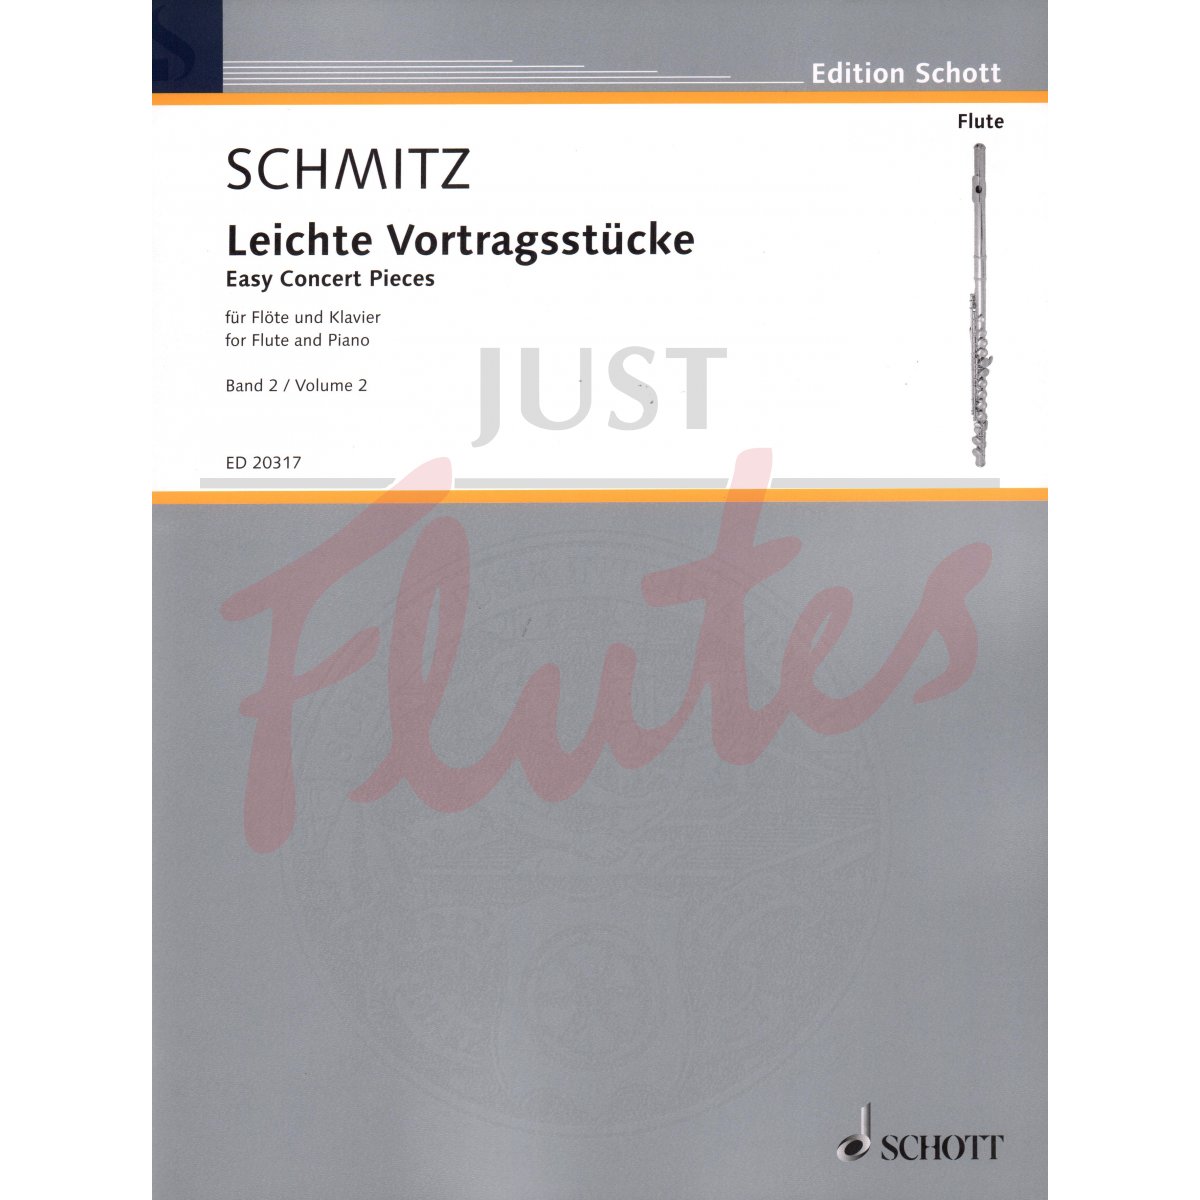 Easy Concert Pieces for Flute and Piano, Vol 2